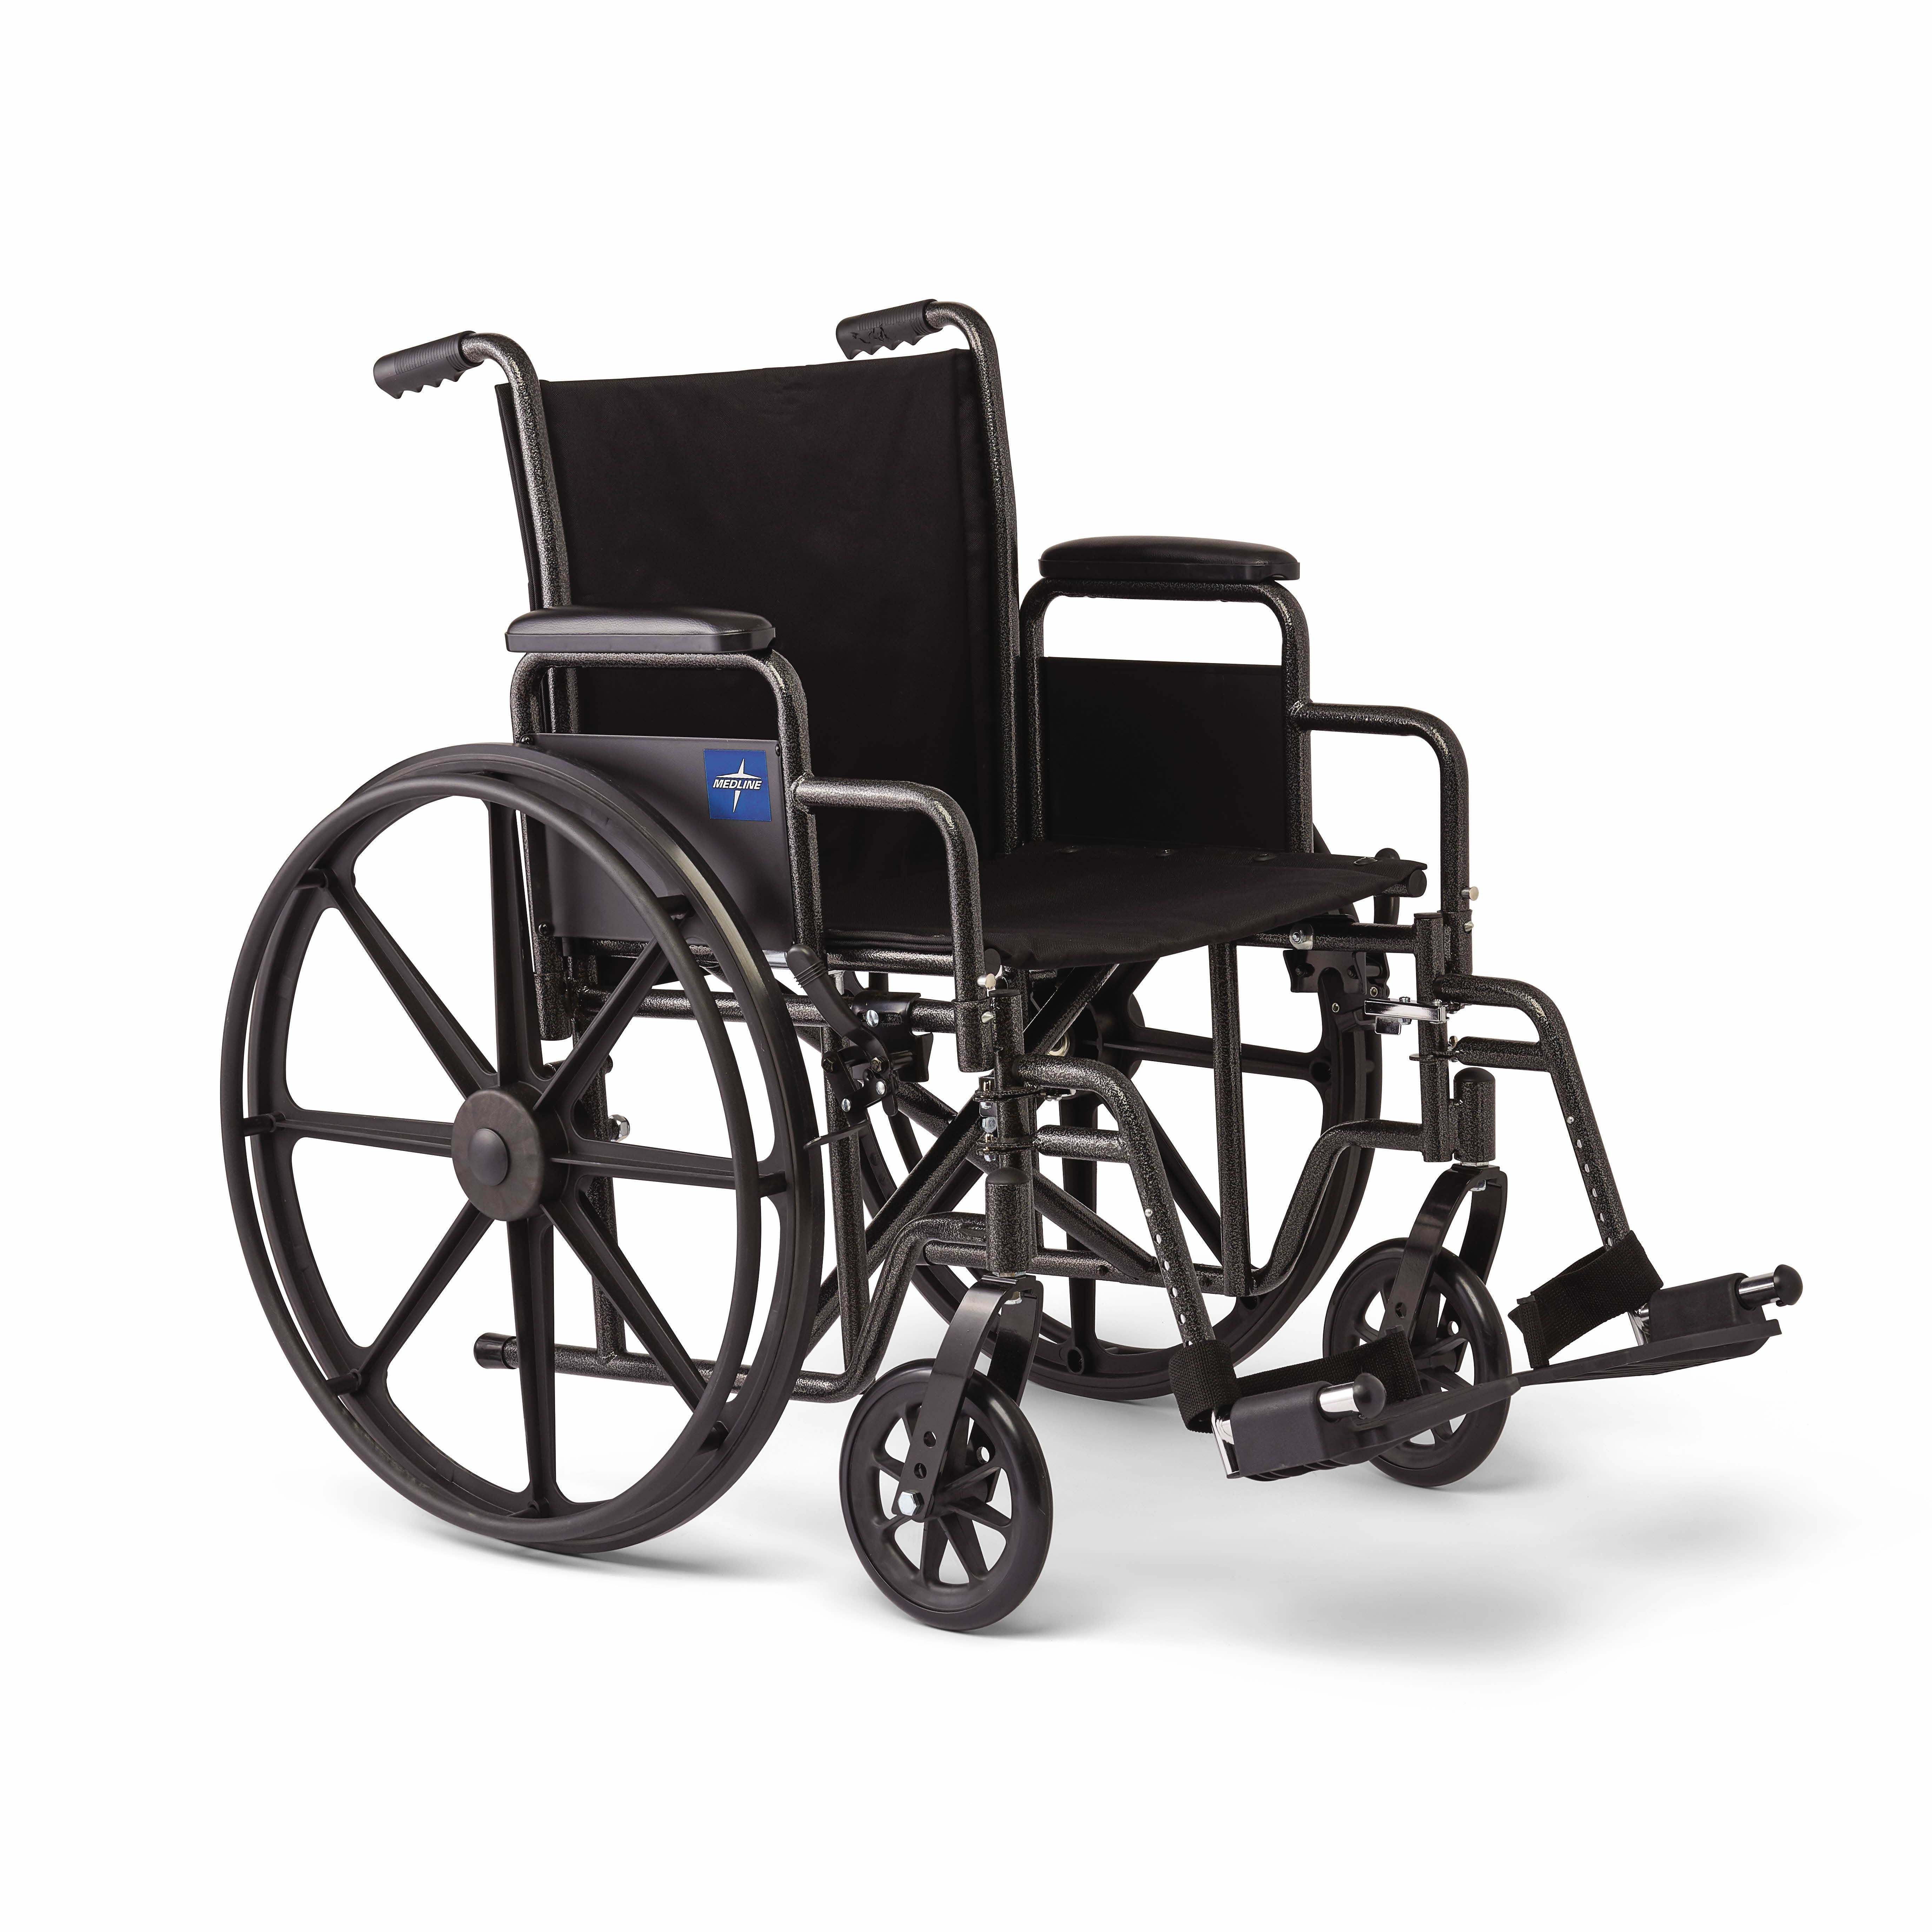 Medline 20" Wide K1 Basic Nylon Wheelchair with Swing-Back Desk-Length Arms and Swing-Away Leg Rests